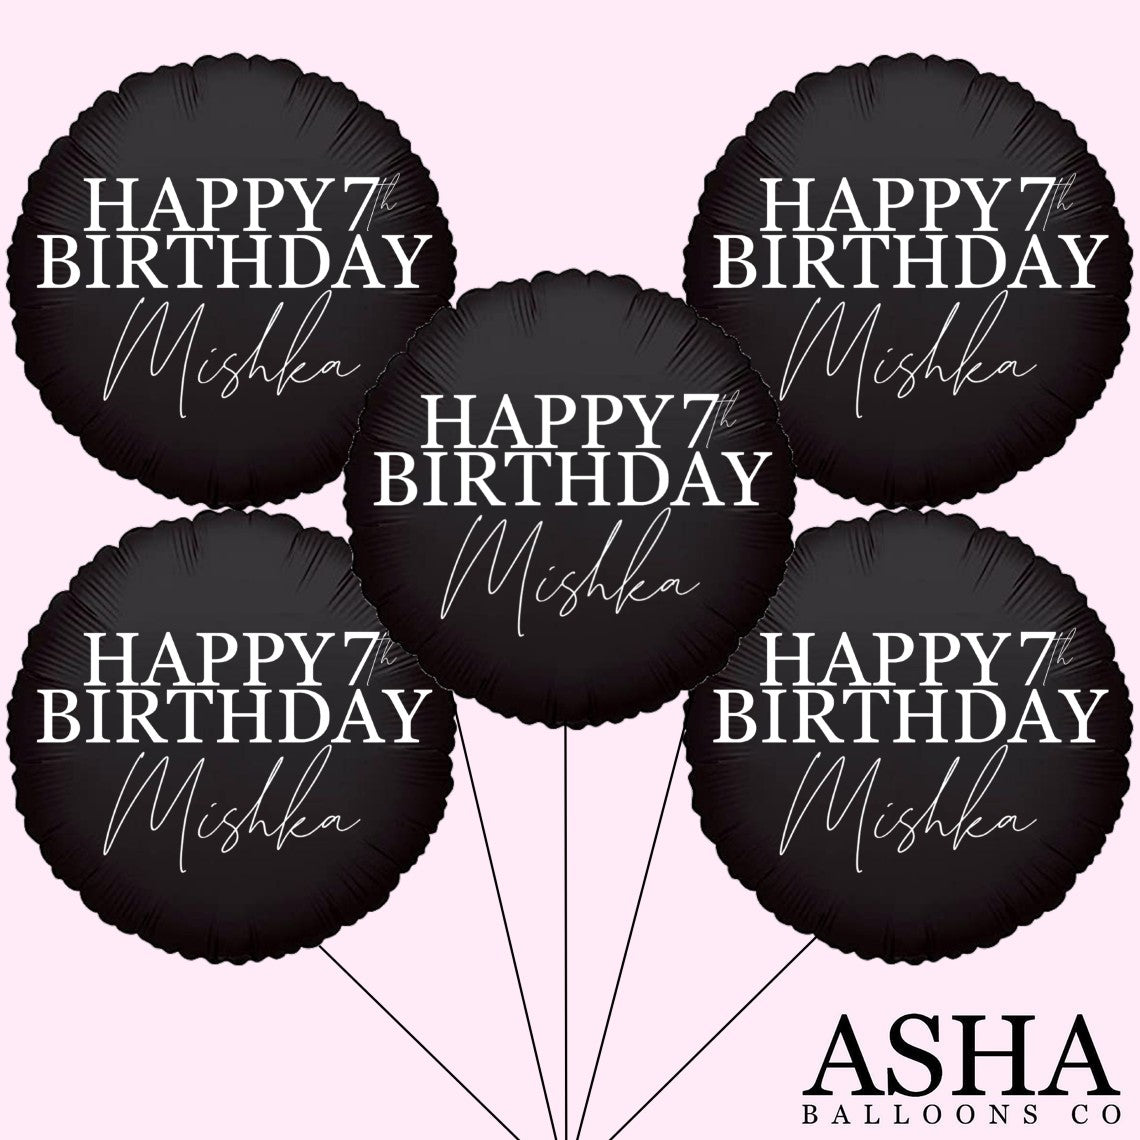 Personalized/Customized Custom Name/Text & Age Black Round Foil/Mylar Balloons For Six Months/First/Second/Third/Sixteenth/Twenty-First/Thirty/Forty/Fifty/Sixty/Seventieth Birthday, Milestone Birthday or a Special Themed Birthday Event. Supports Helium/Air, Luxury Bespoke Balloons Are a Perfect Surprise For Your Baby, Wife, Mom, Dad, Brother, Sister, Friends & Loved Ones